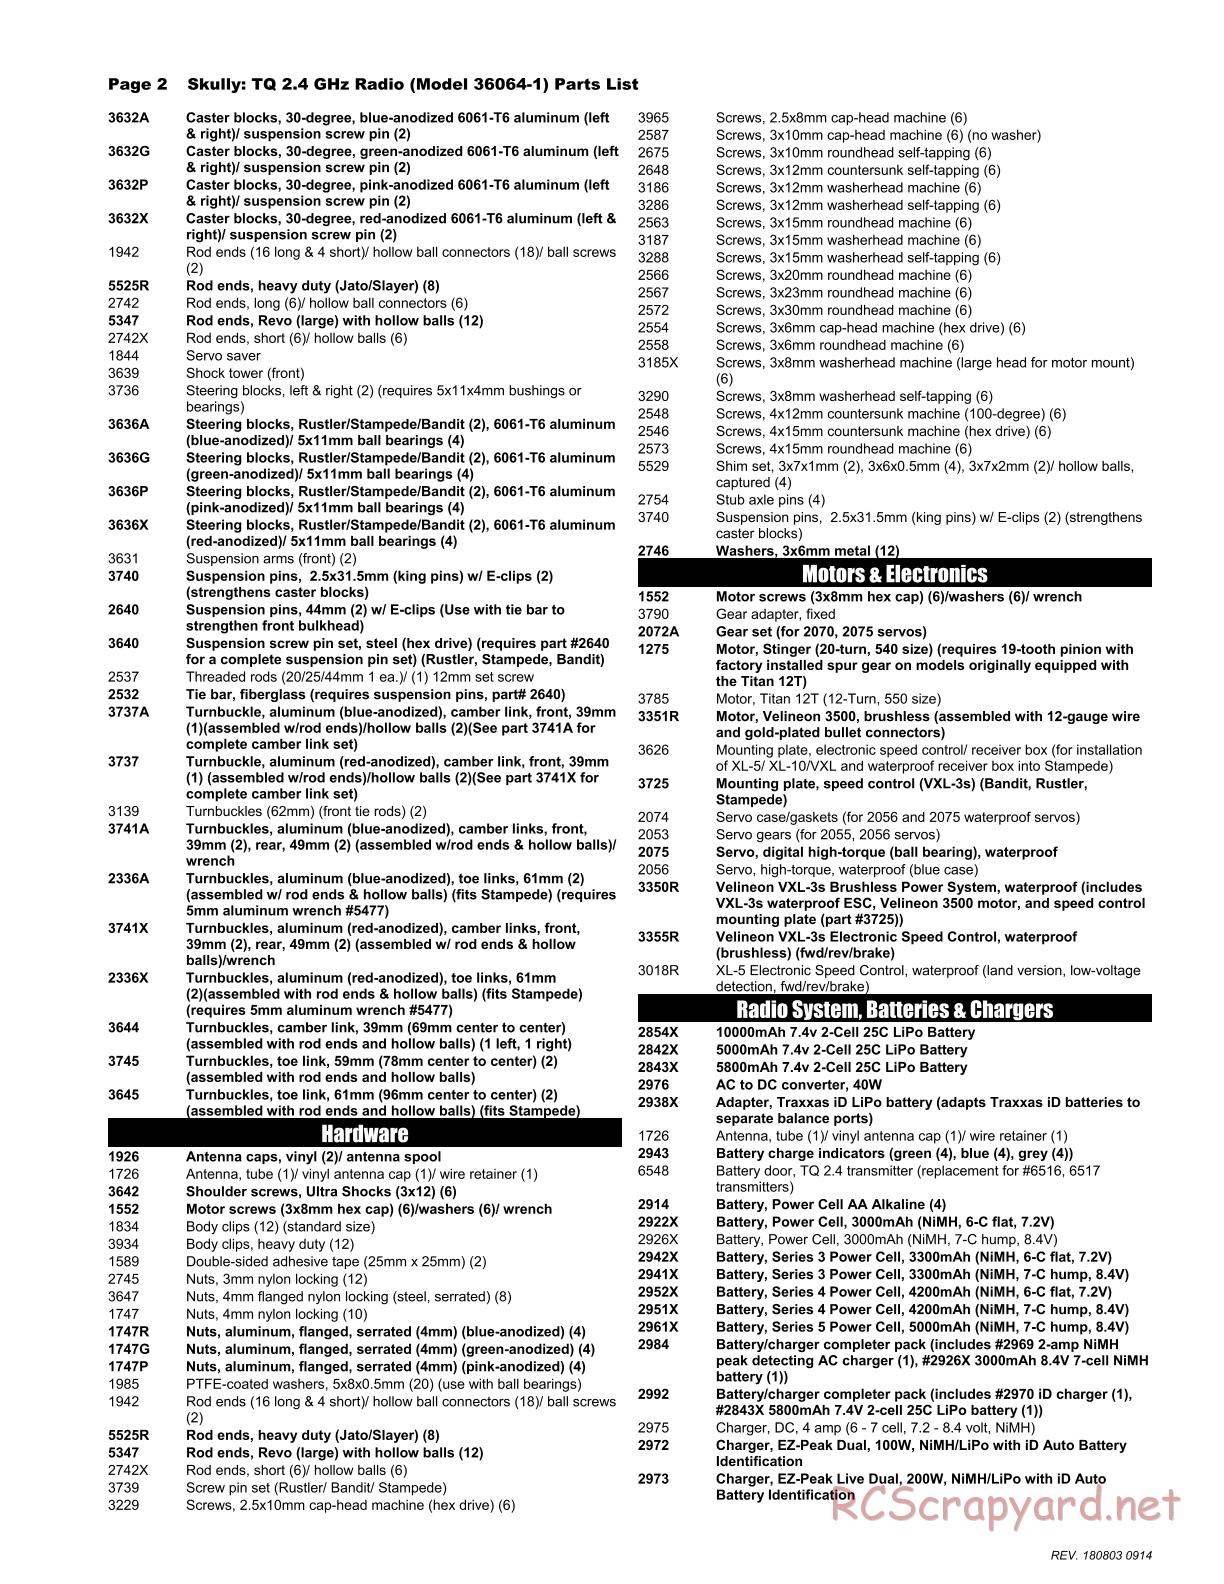 Traxxas - Skully - Parts List - Page 2